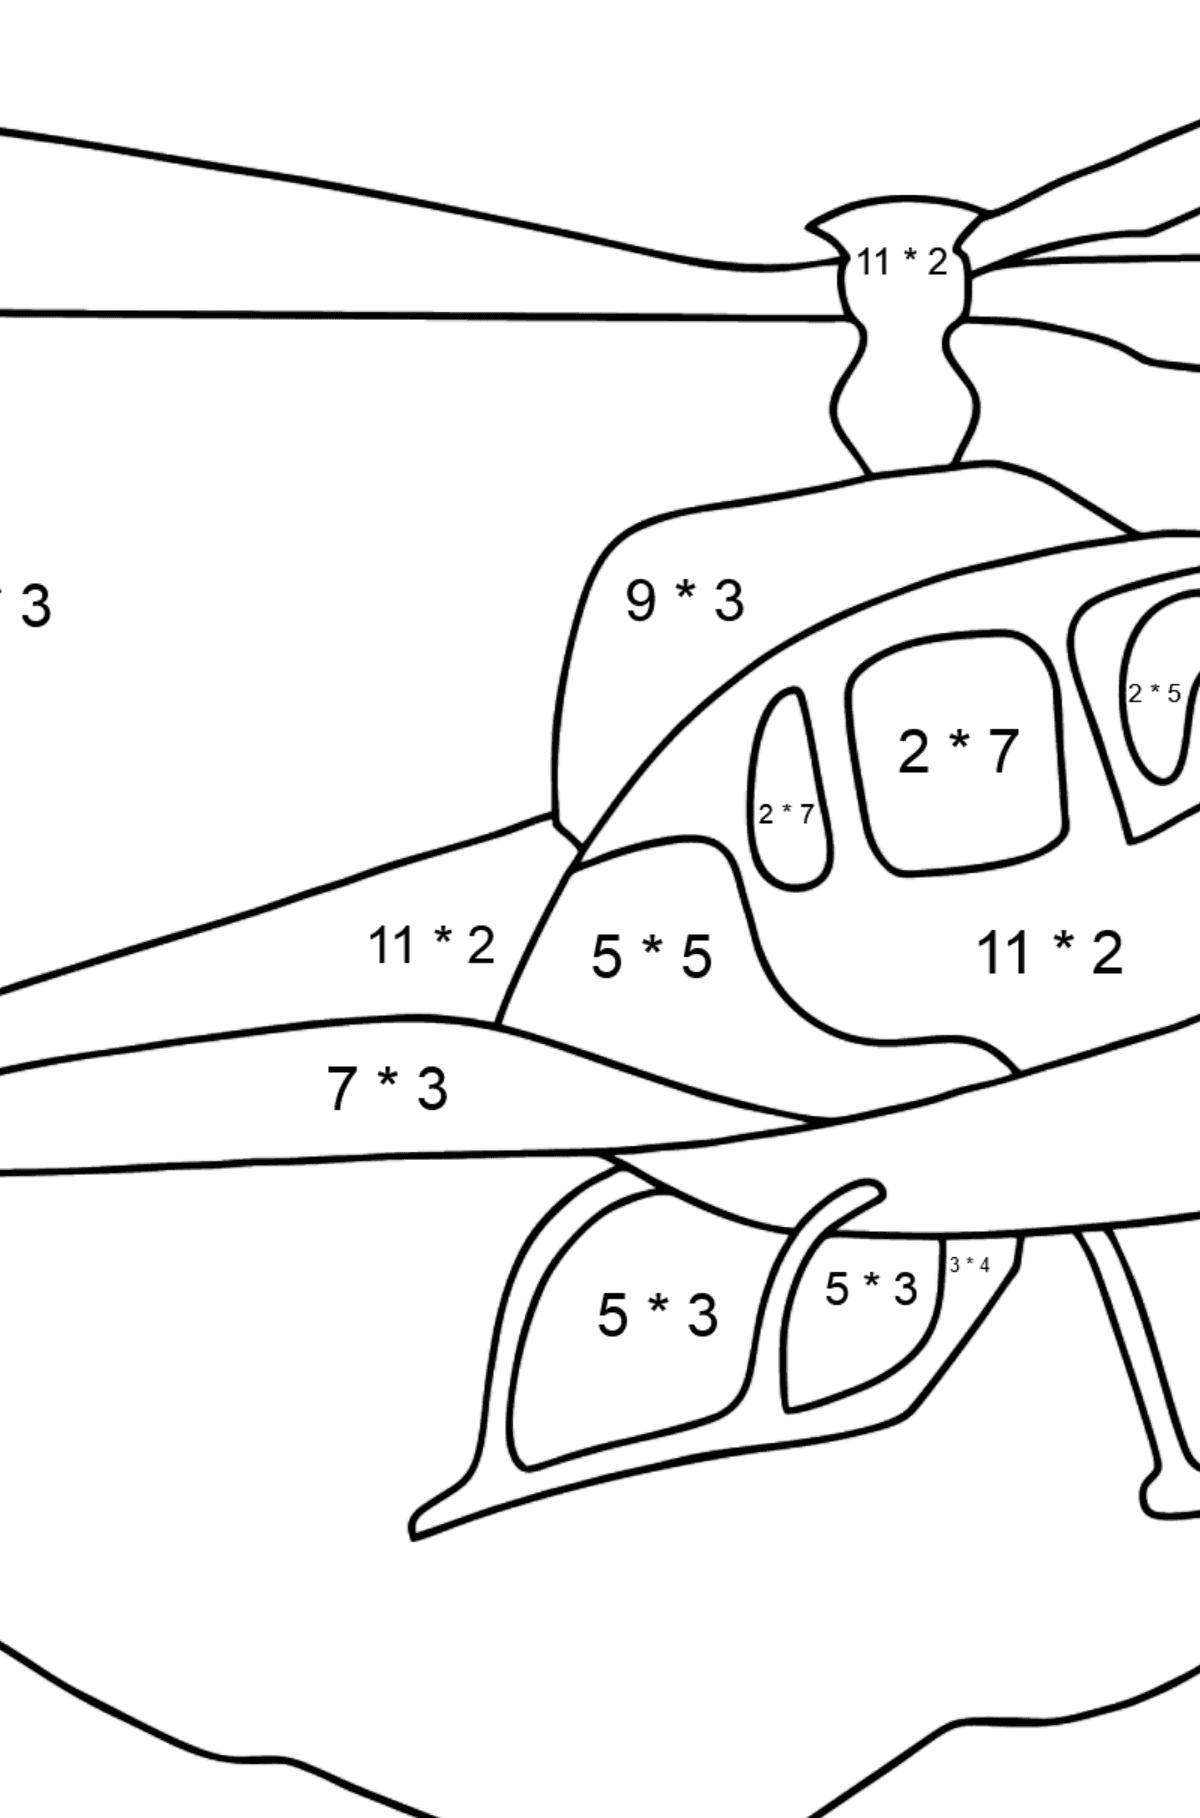 Coloring Page - A City Helicopter - Math Coloring - Multiplication for Kids